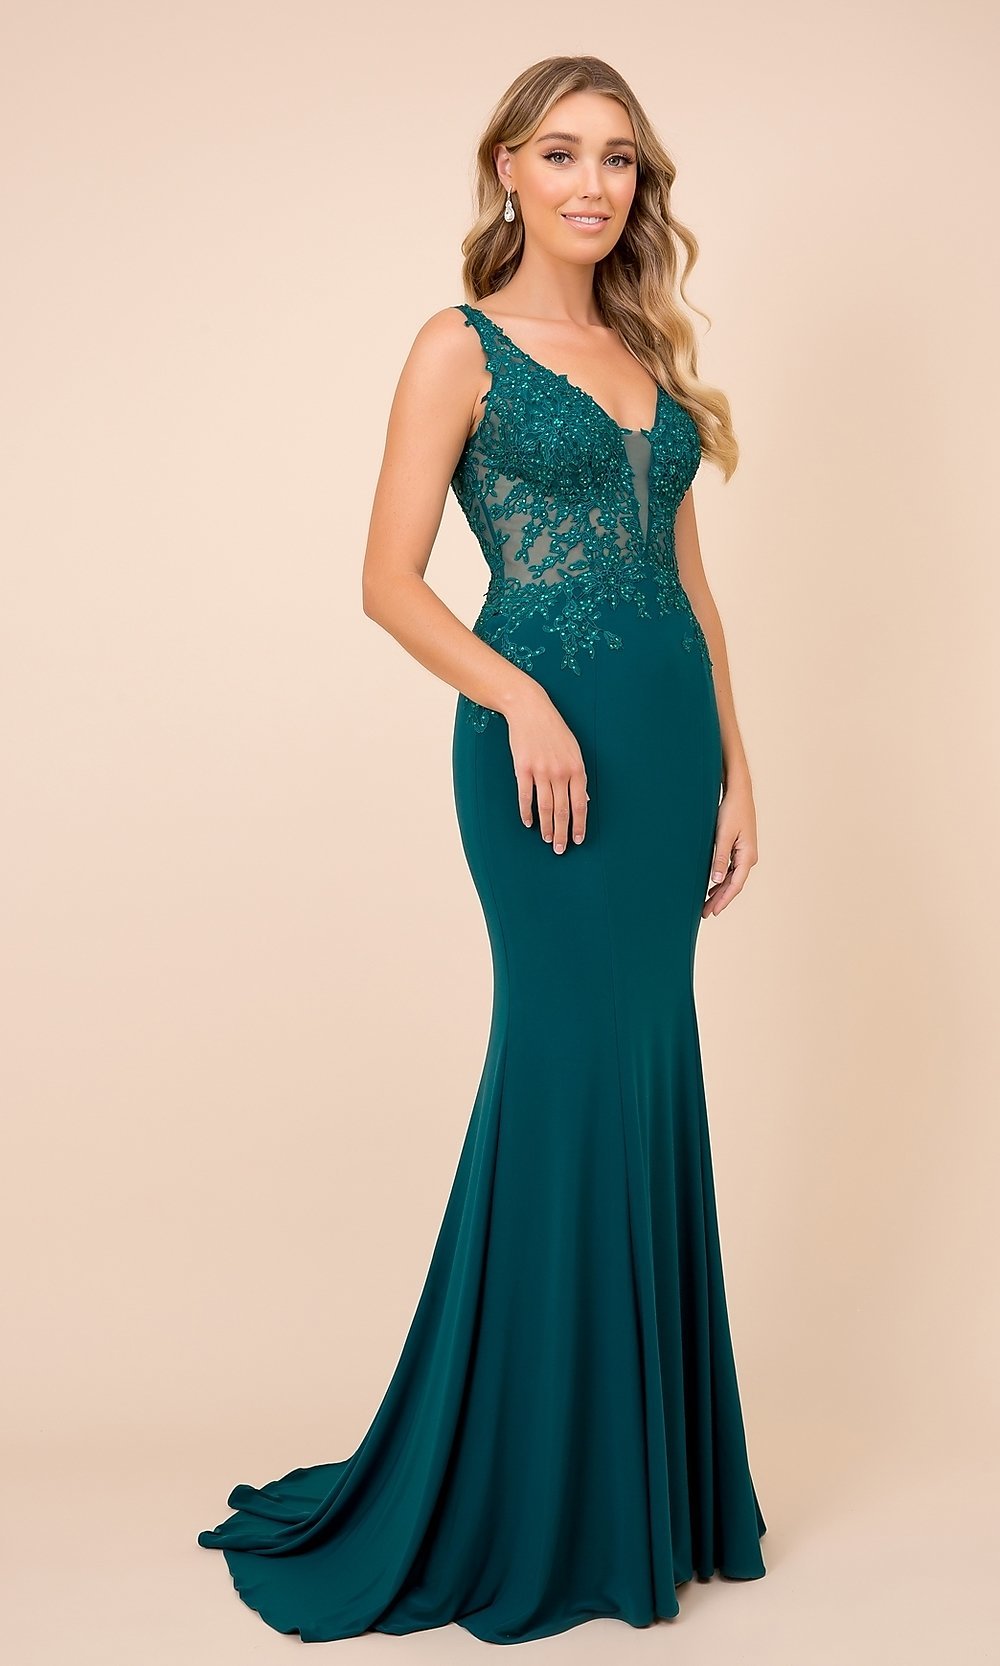 Embroidered Illusion-Bodice Long Prom Dress